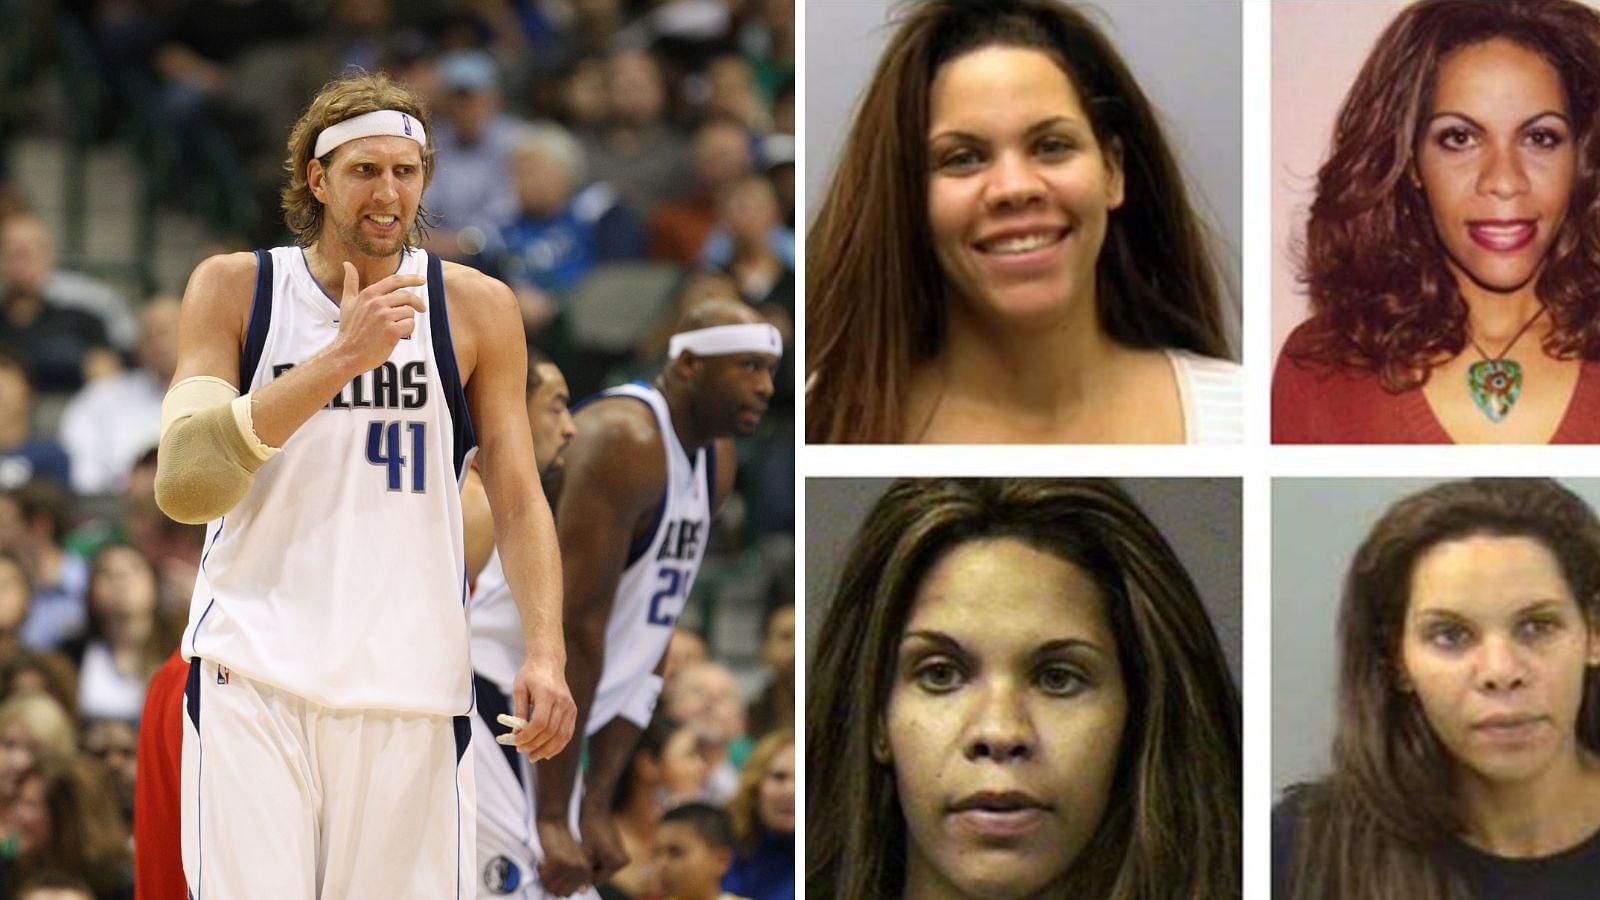 Dirk Nowitzki, Who Was About to Gift $250,000 Ring to His ex-Fiancee, is Still 'Super Embarrassed' by Her Arrest